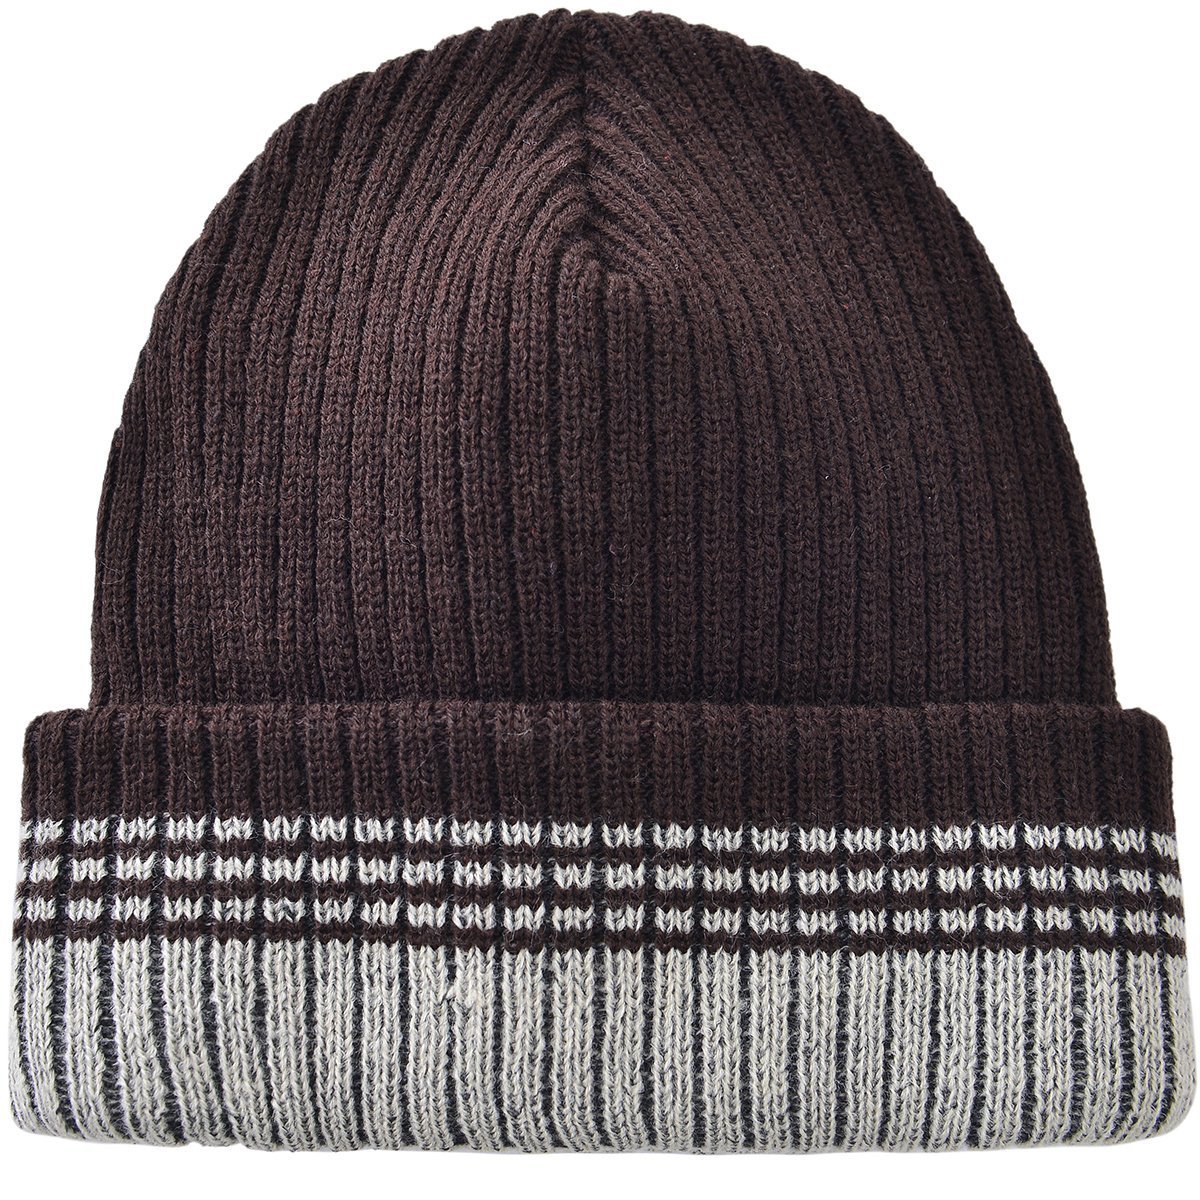 Stripped Toboggan Brown by Mad Style Wholesale